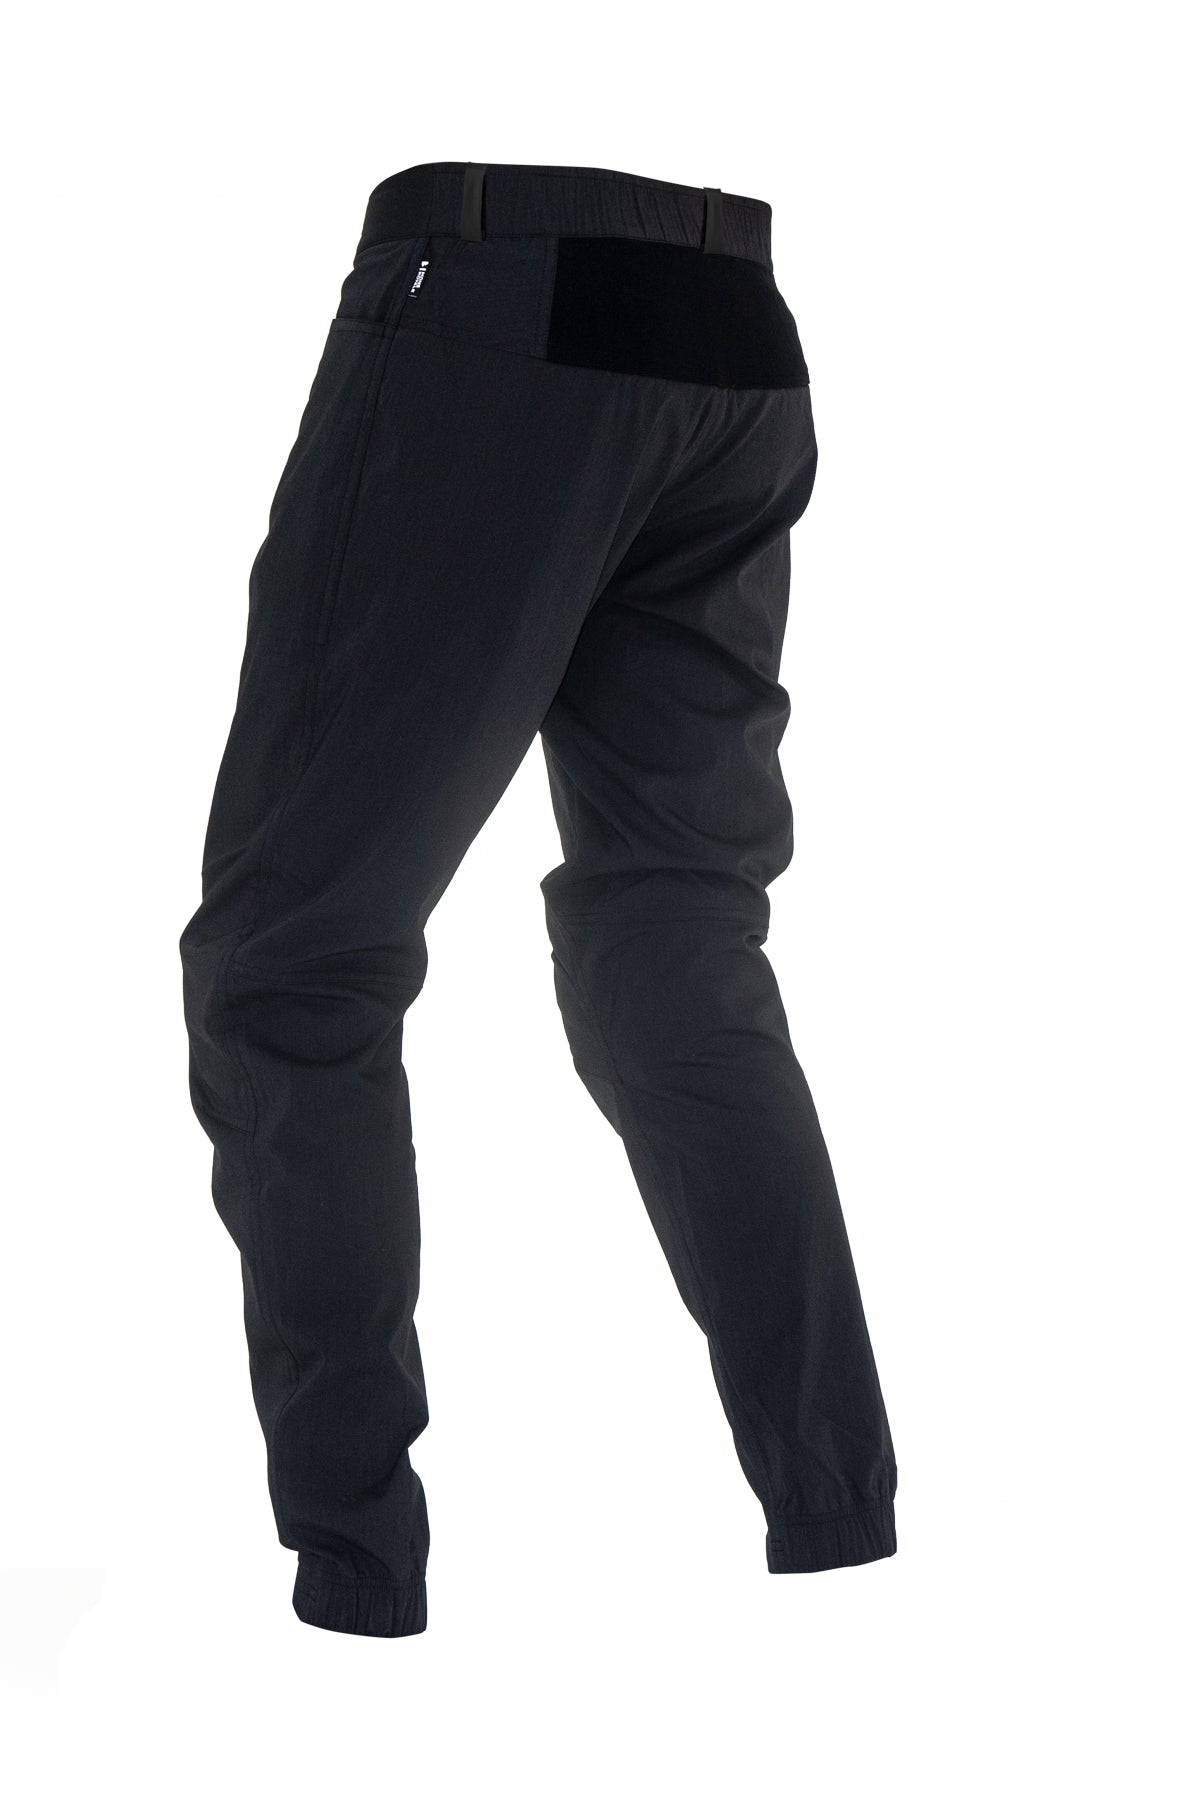 The Lab: Mons Royale Virage Pants tested extensively